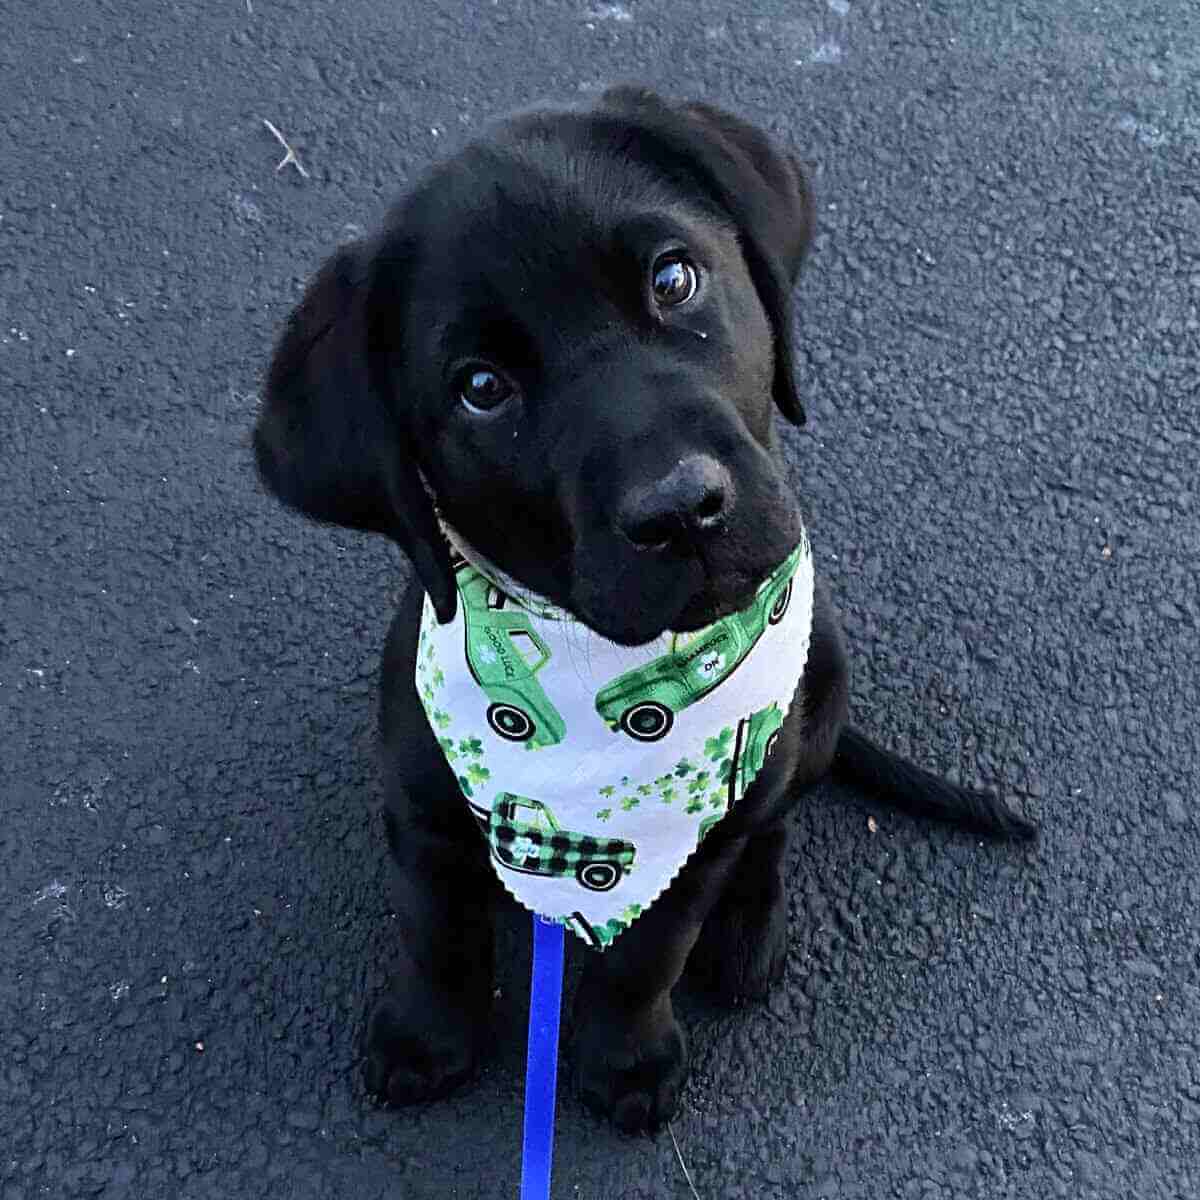 Black lab puppy Rumor sits on the pavement and looks up at the camera. Rumor wears a white bandana with a green car pattern for St. Patrick's Day.